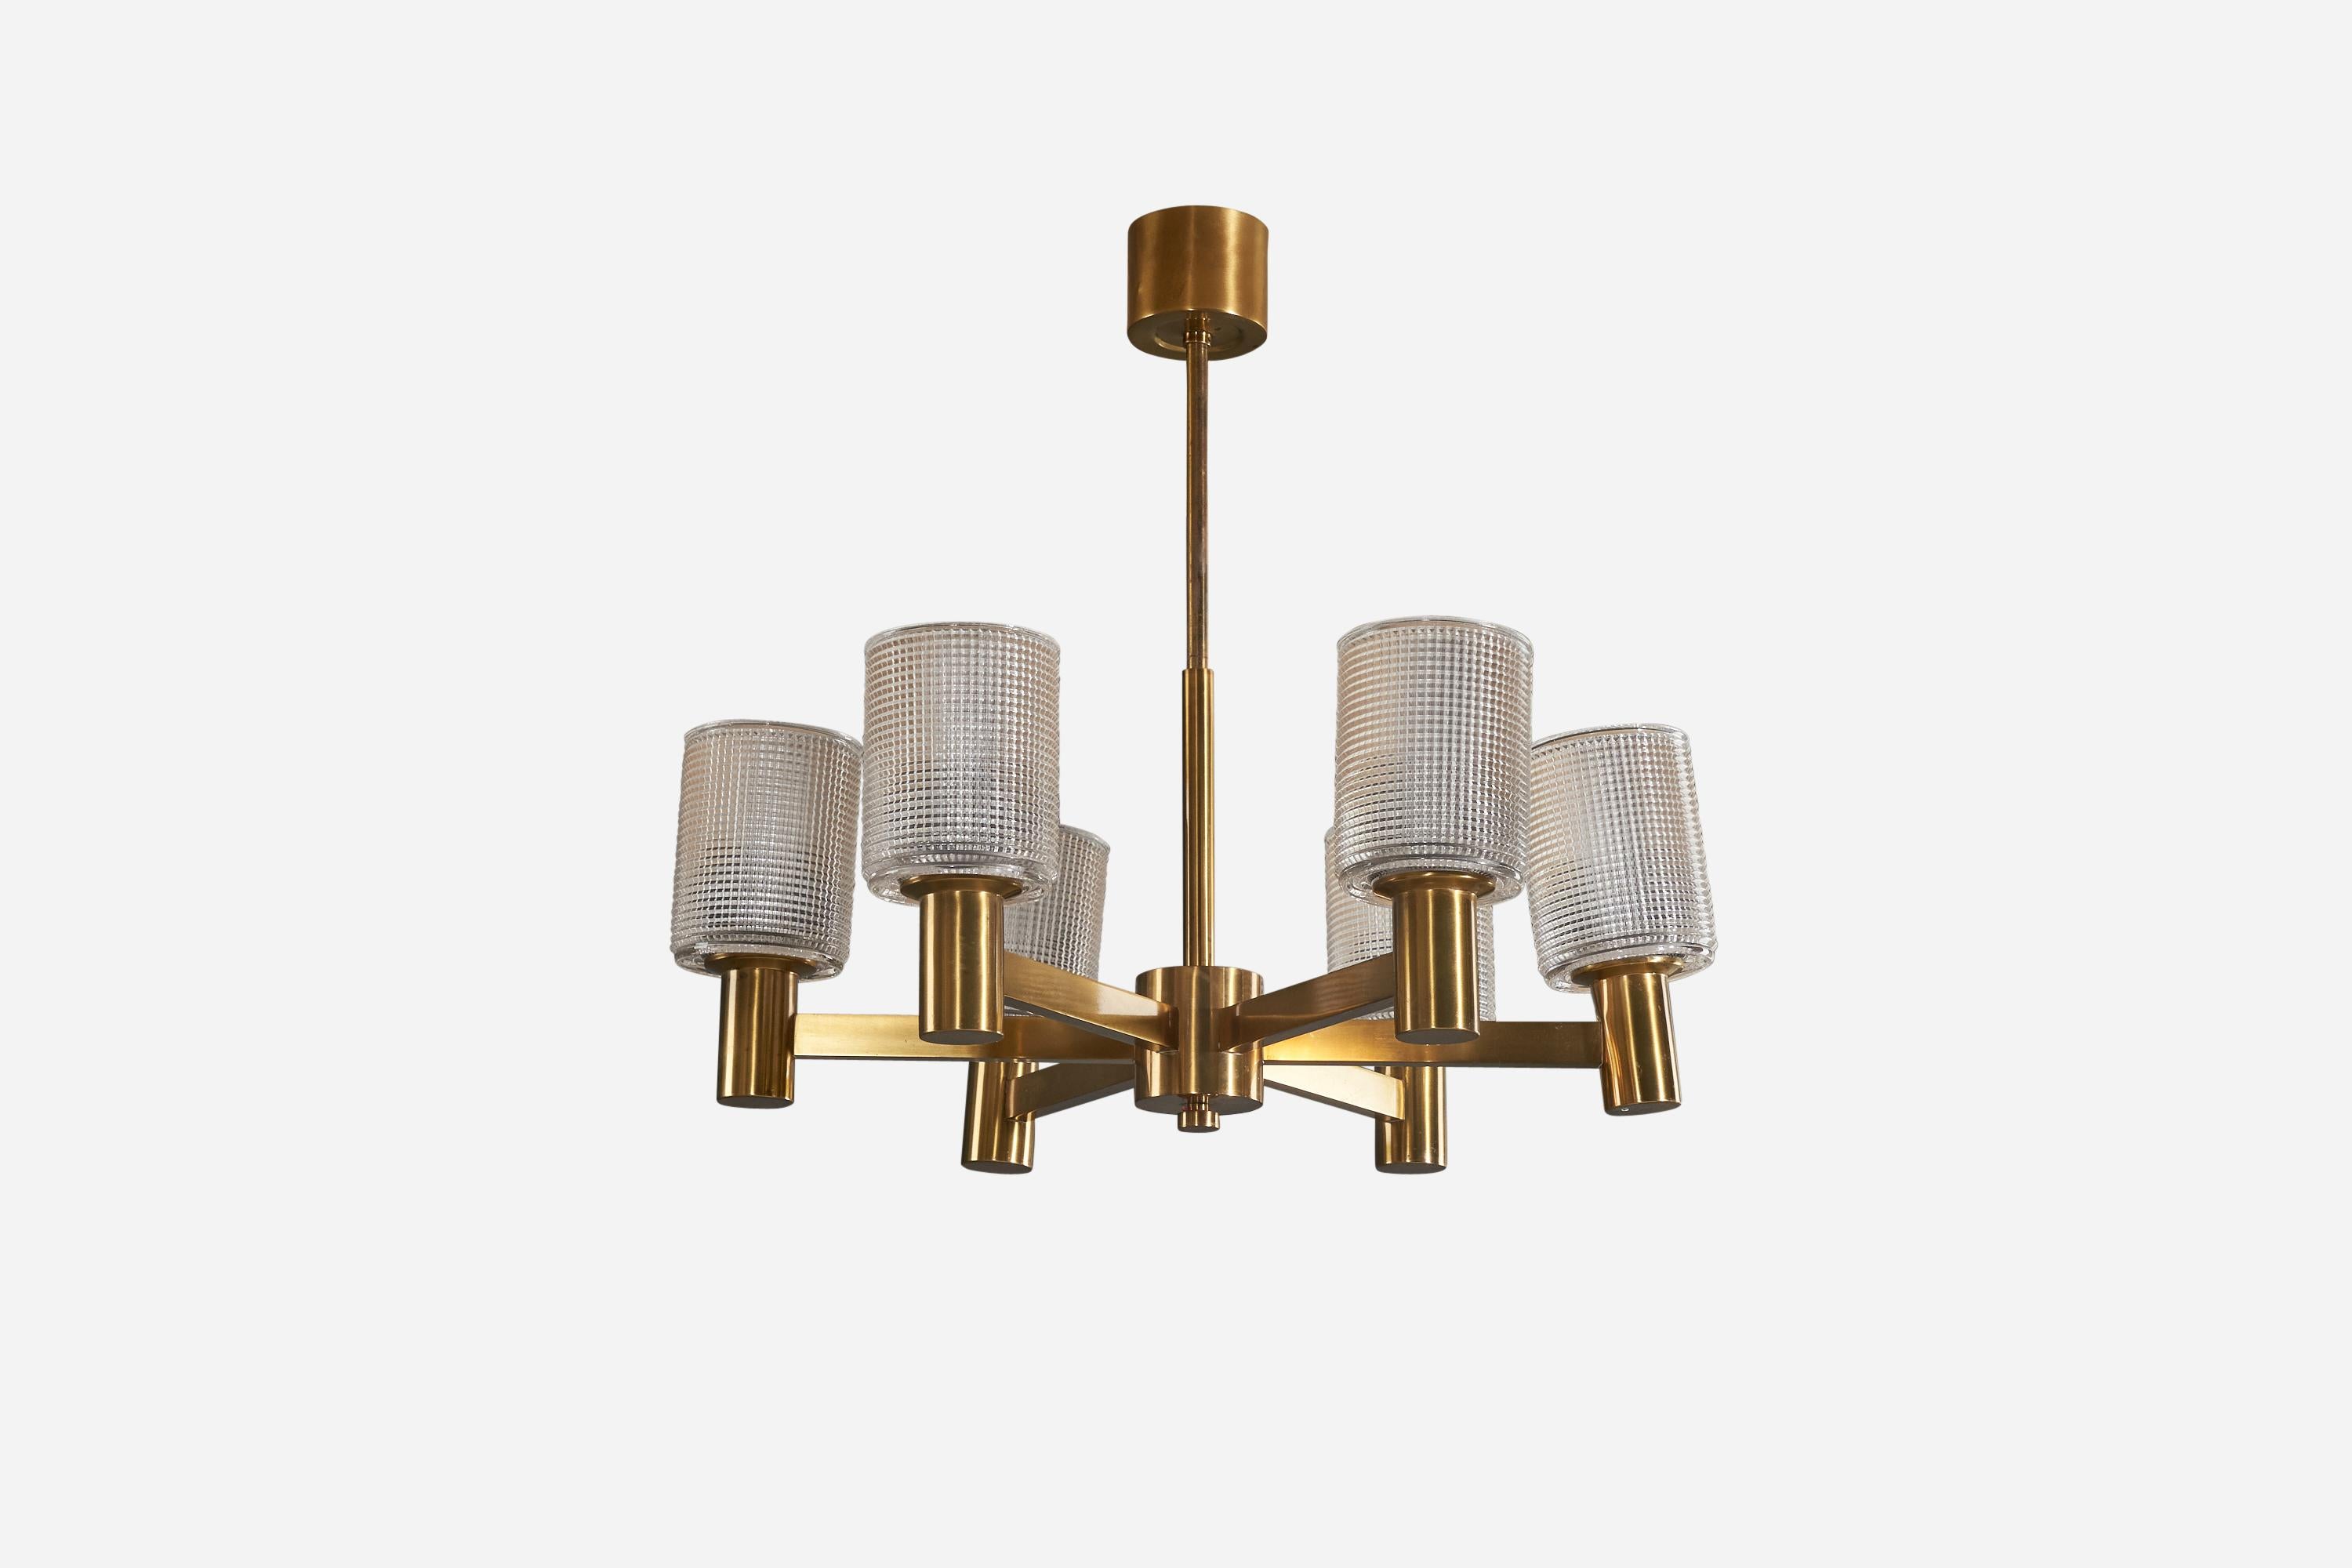 A six-armed chandelier in brass and glass designed and produced by a Swedish designer, Sweden, 1950s.

Canopy Dimensions: 2.62 x 3.37 x 3.37 (H x W x D).